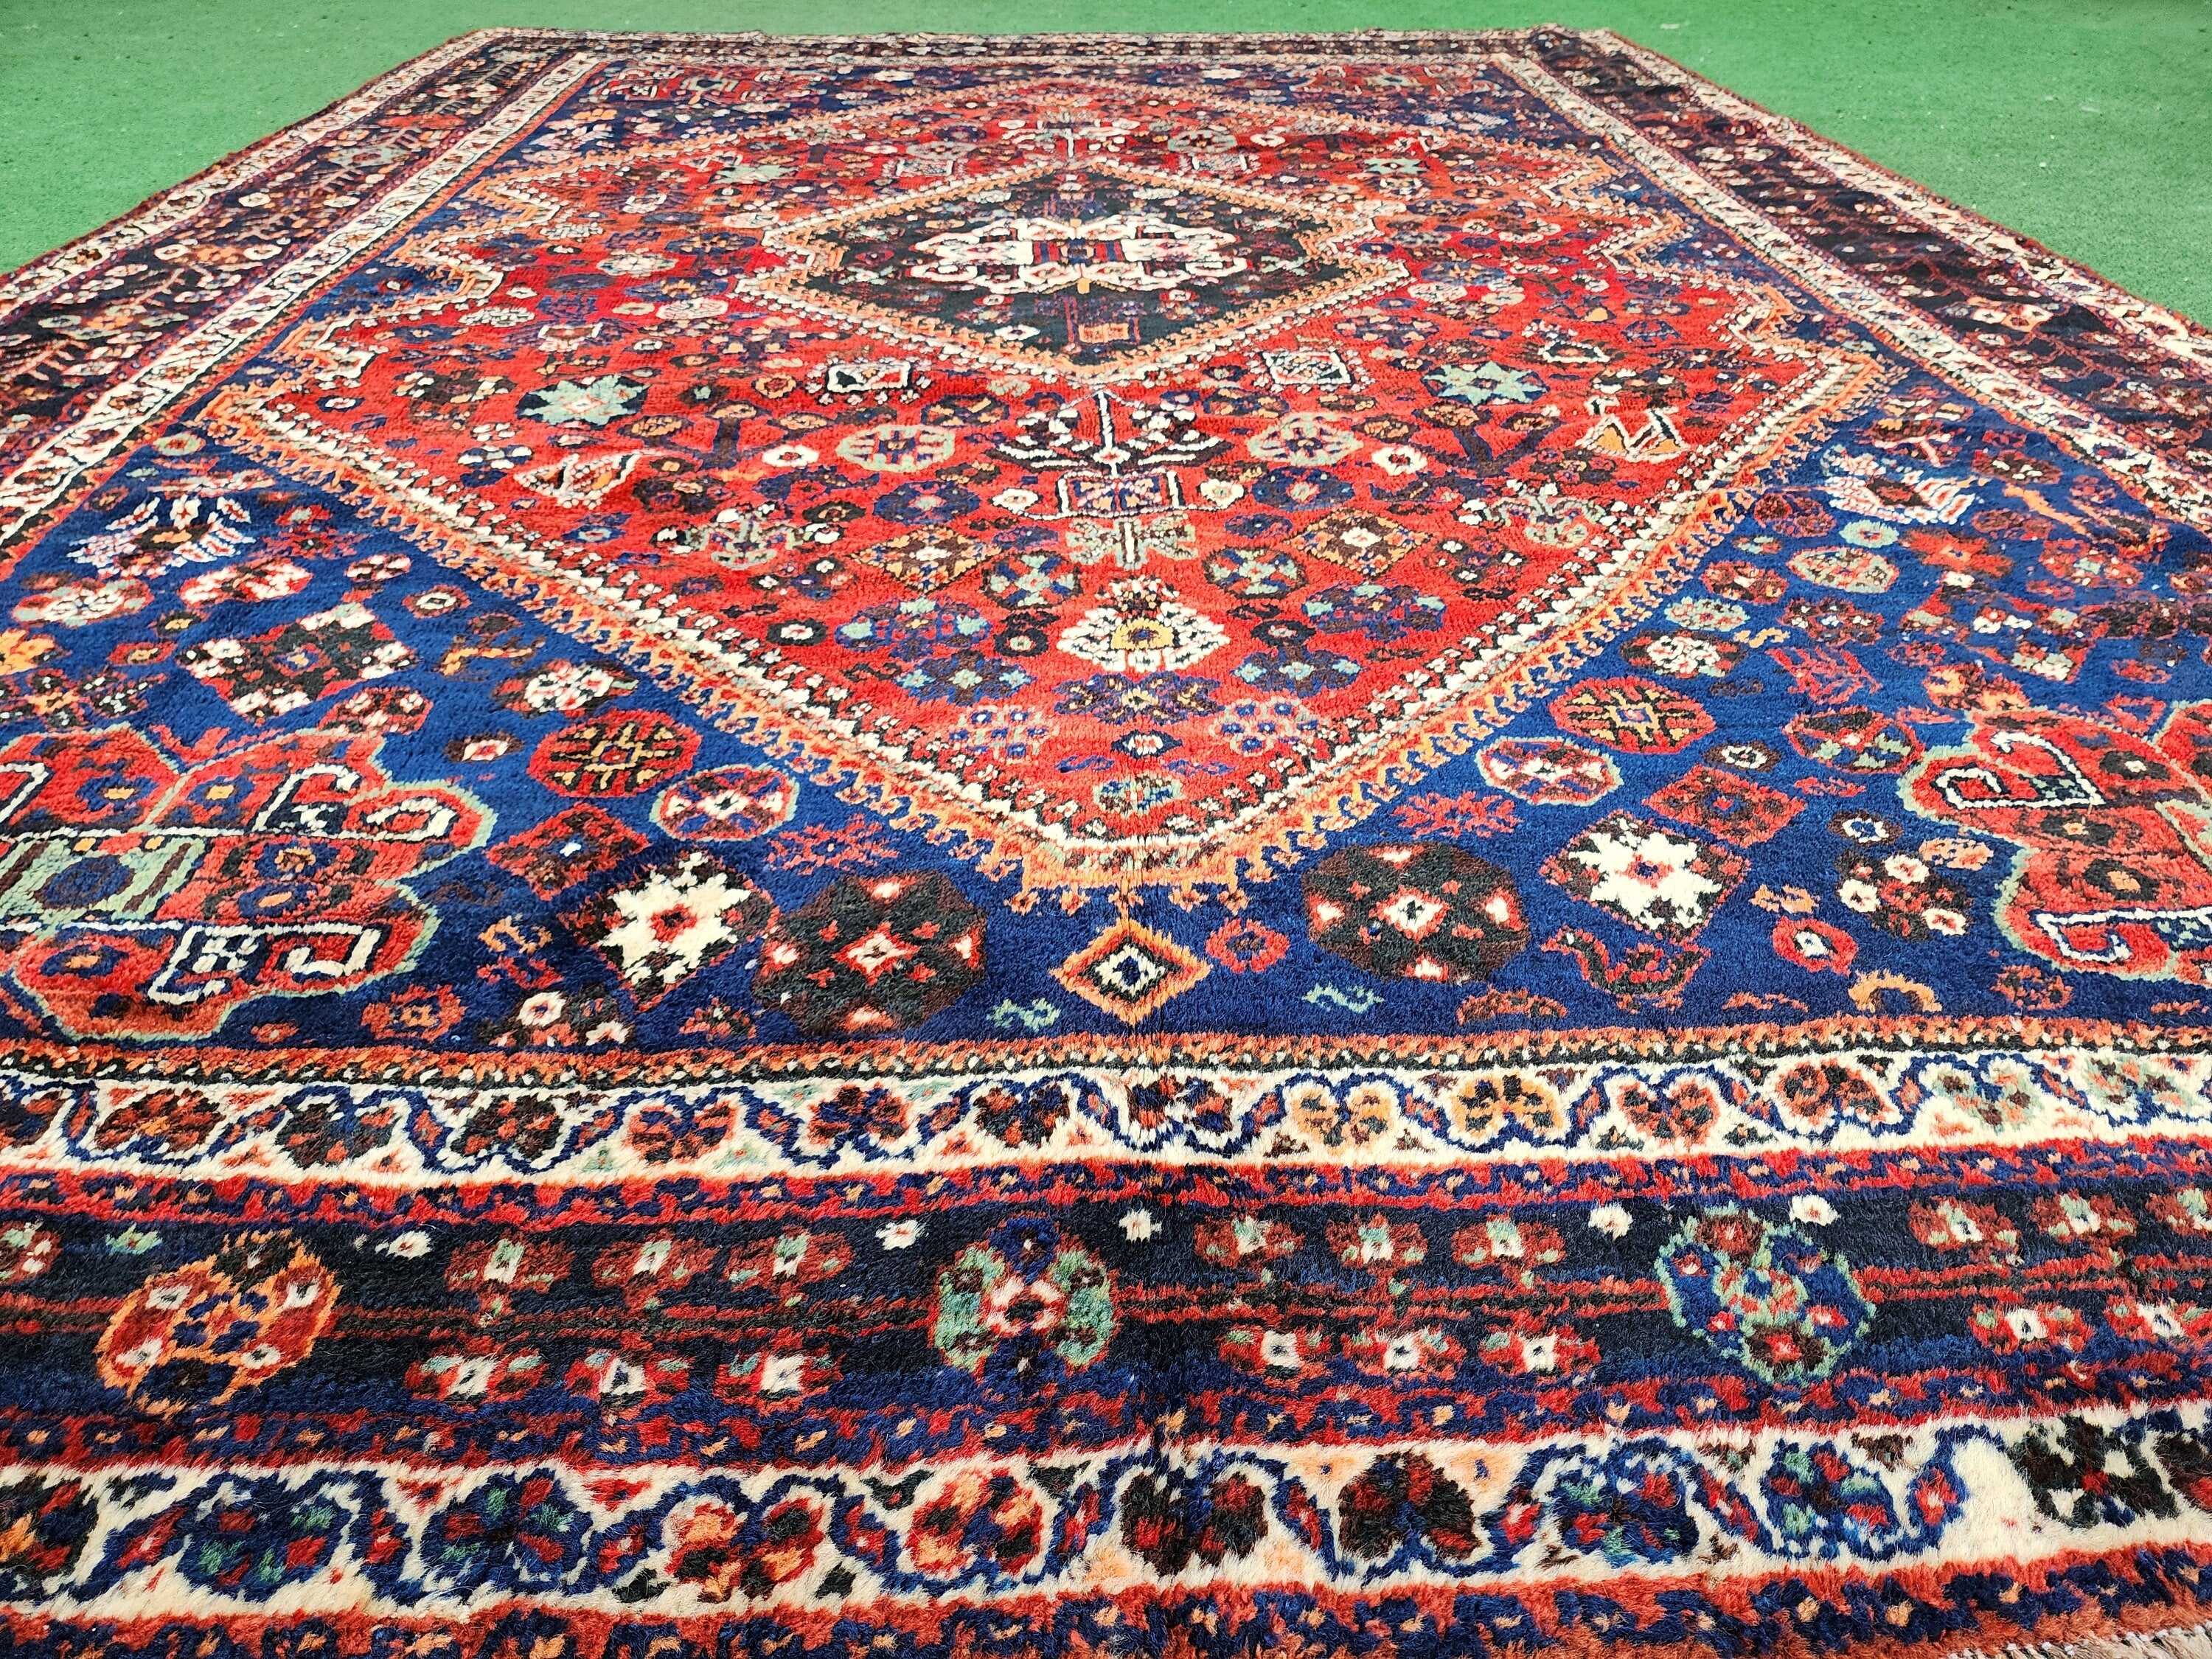 Red and Blue Antique Persian Area Rug 10 x 7 ft Vintage Turkish Tribal Natural Wool Rug, Recycled Oriental Design Rustic Bohemian Floor Rug